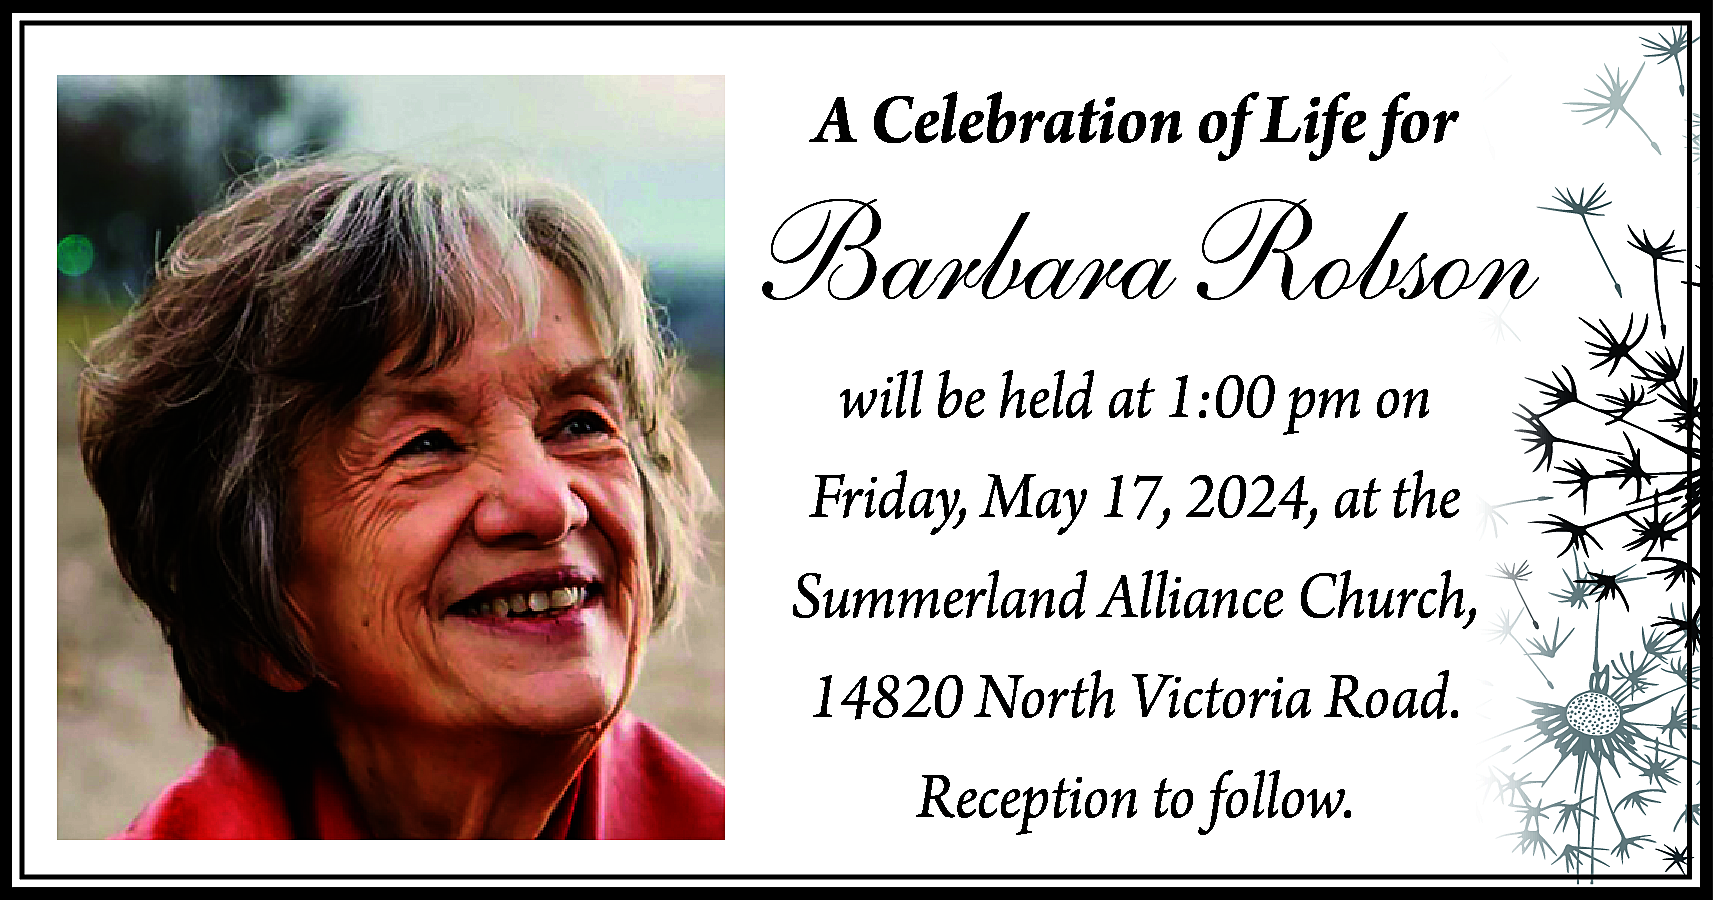 A Celebration of Life for  A Celebration of Life for    Barbara Robson  will be held at 1:00 pm on  Friday, May 17, 2024, at the  Summerland Alliance Church,  14820 North Victoria Road.  Reception to follow.    